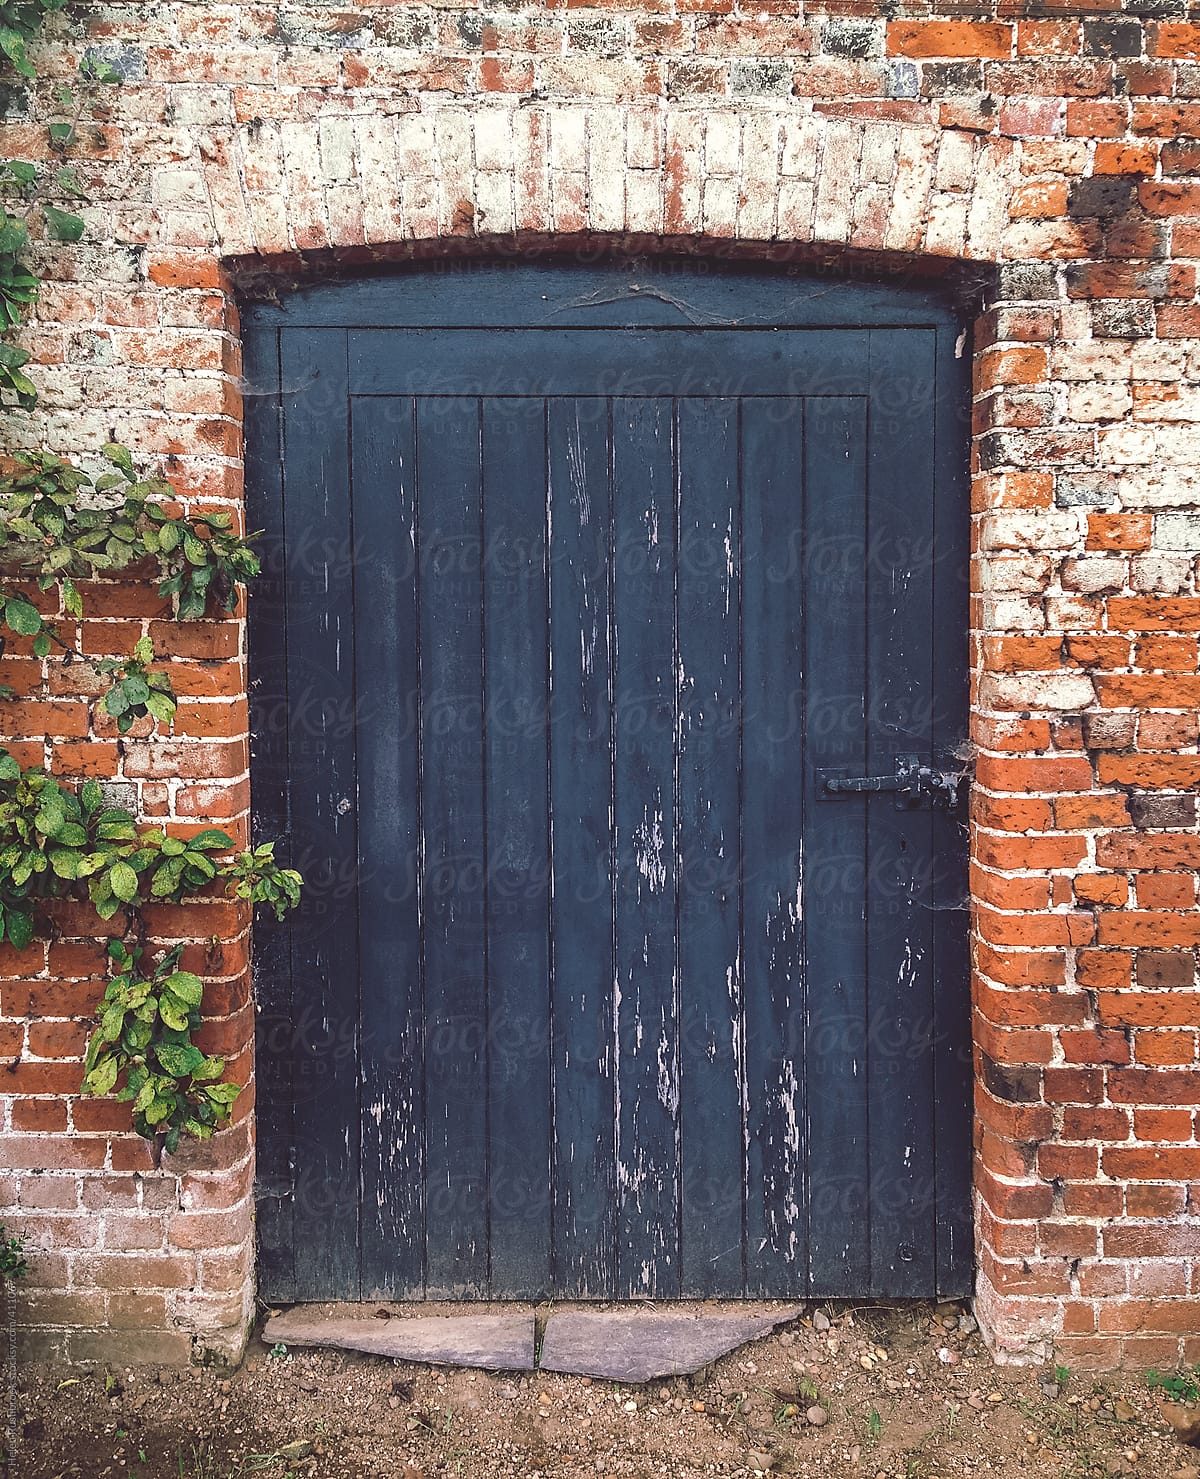 A weathered door in an old brick wall.